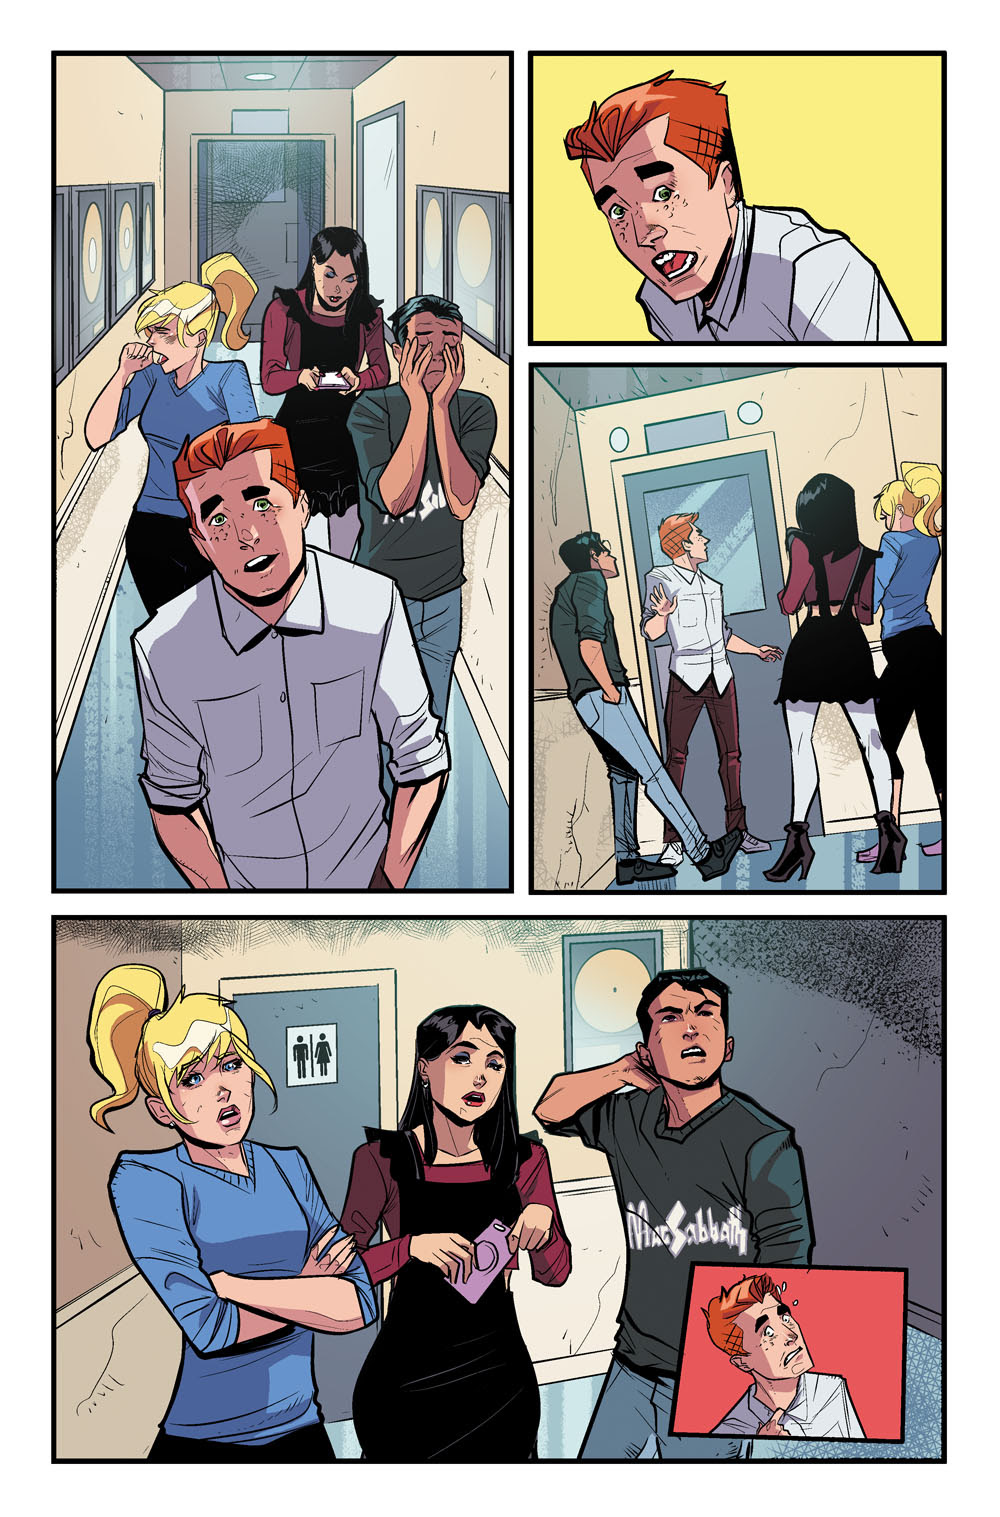 The Archies #6 04